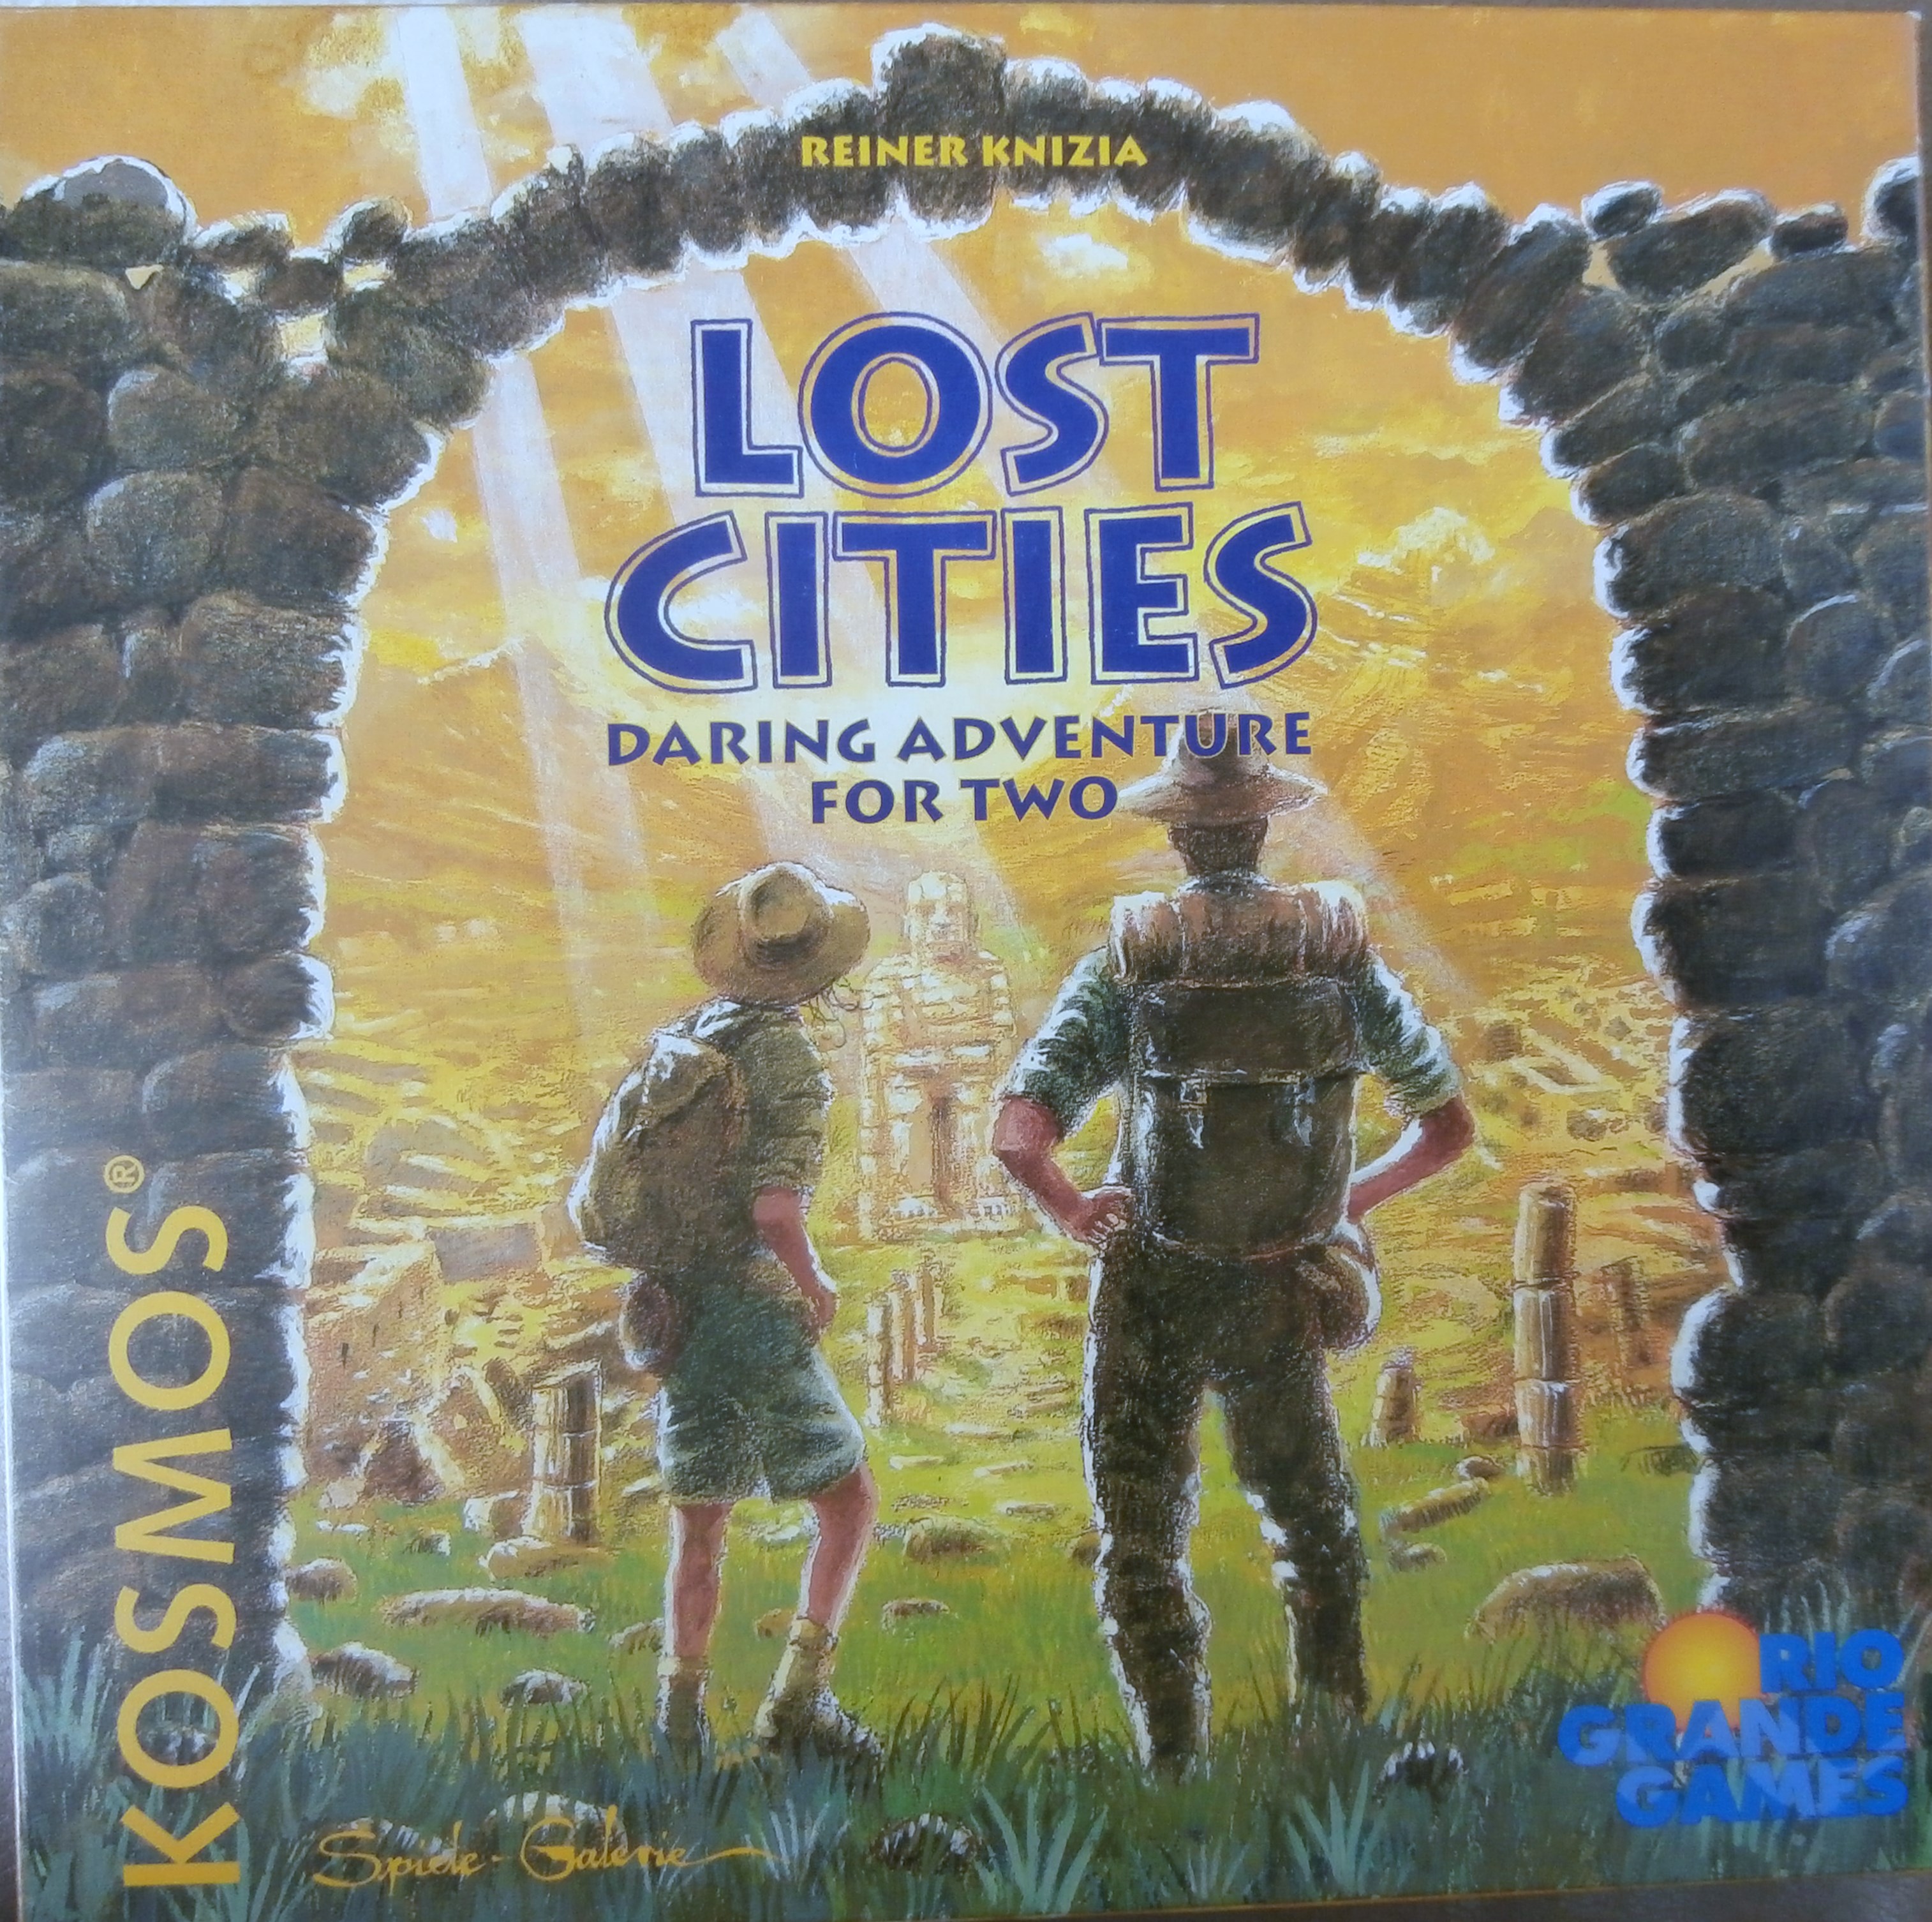 The Two Player Game of Lost Cities